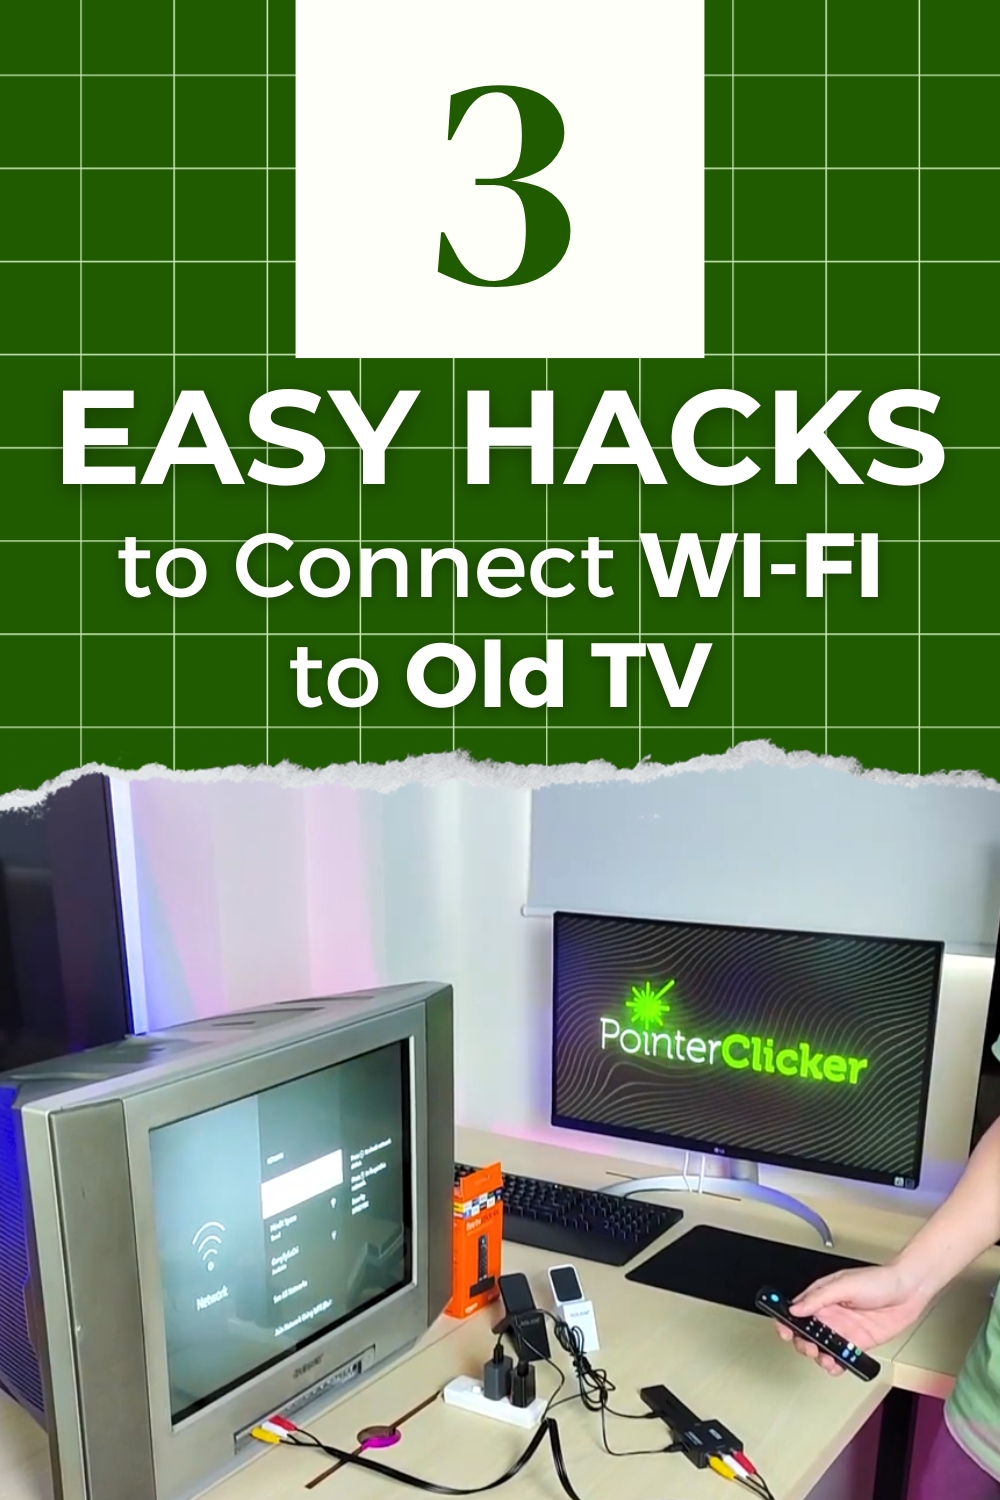 How to Connect an Old TV to Wi-Fi?